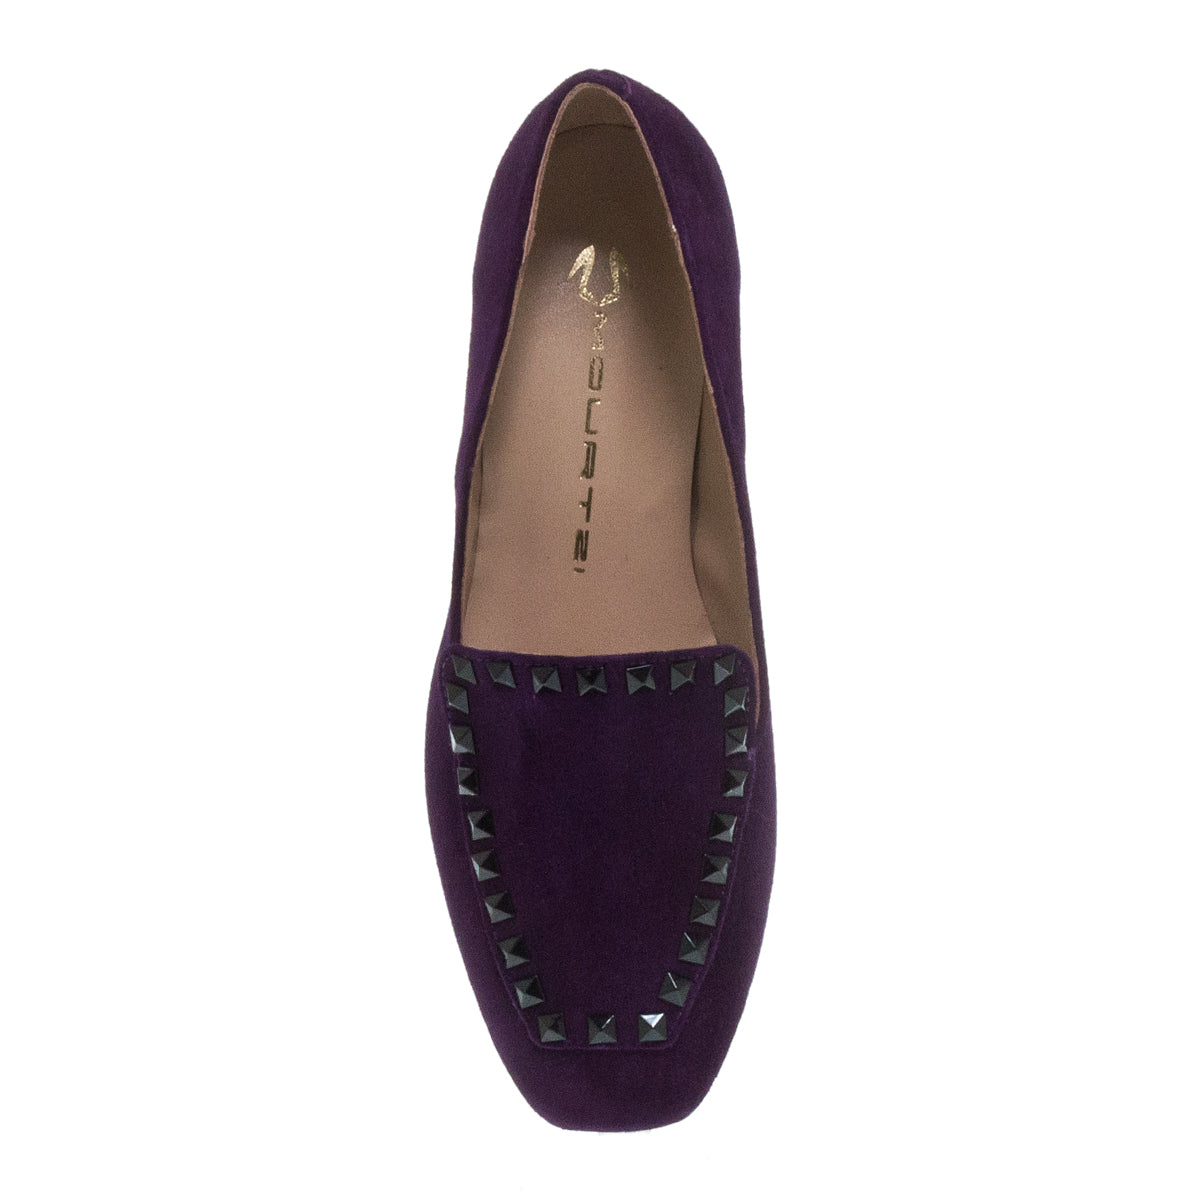 LOAFERS 1/15104 BYZANTIUM SUEDE